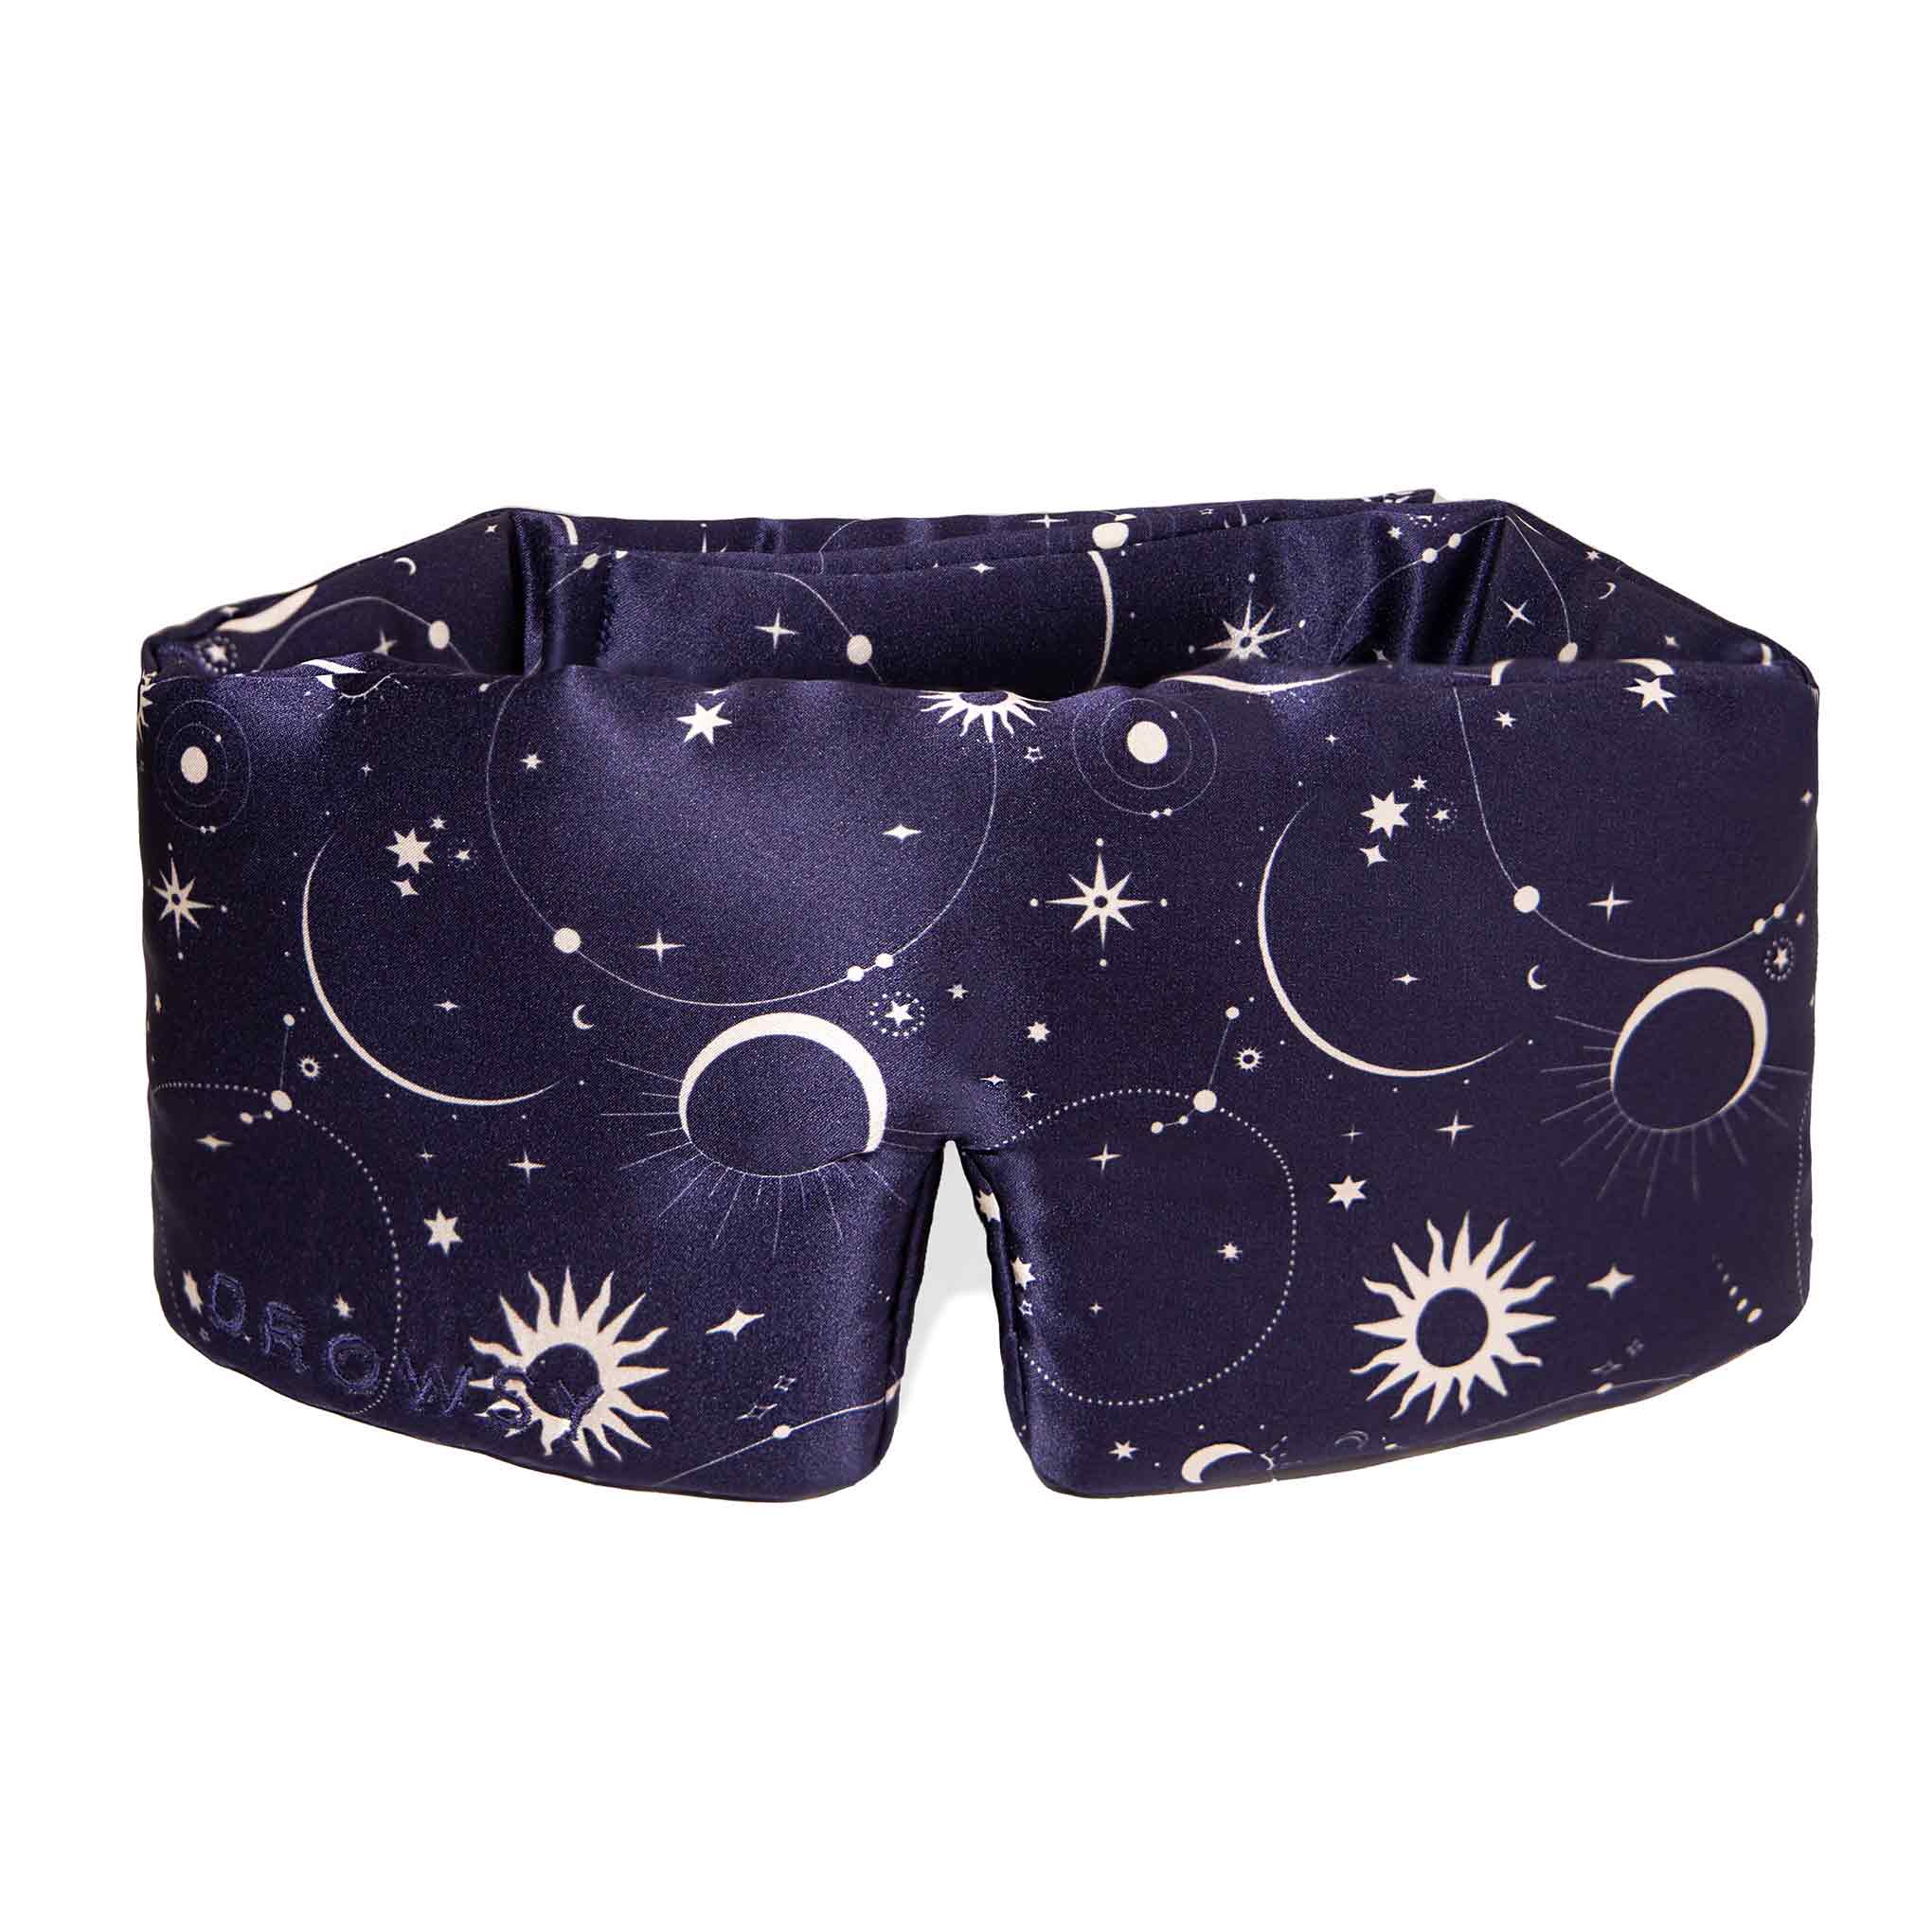 Cosmic patterned Drowsy silk sleep mask on white background